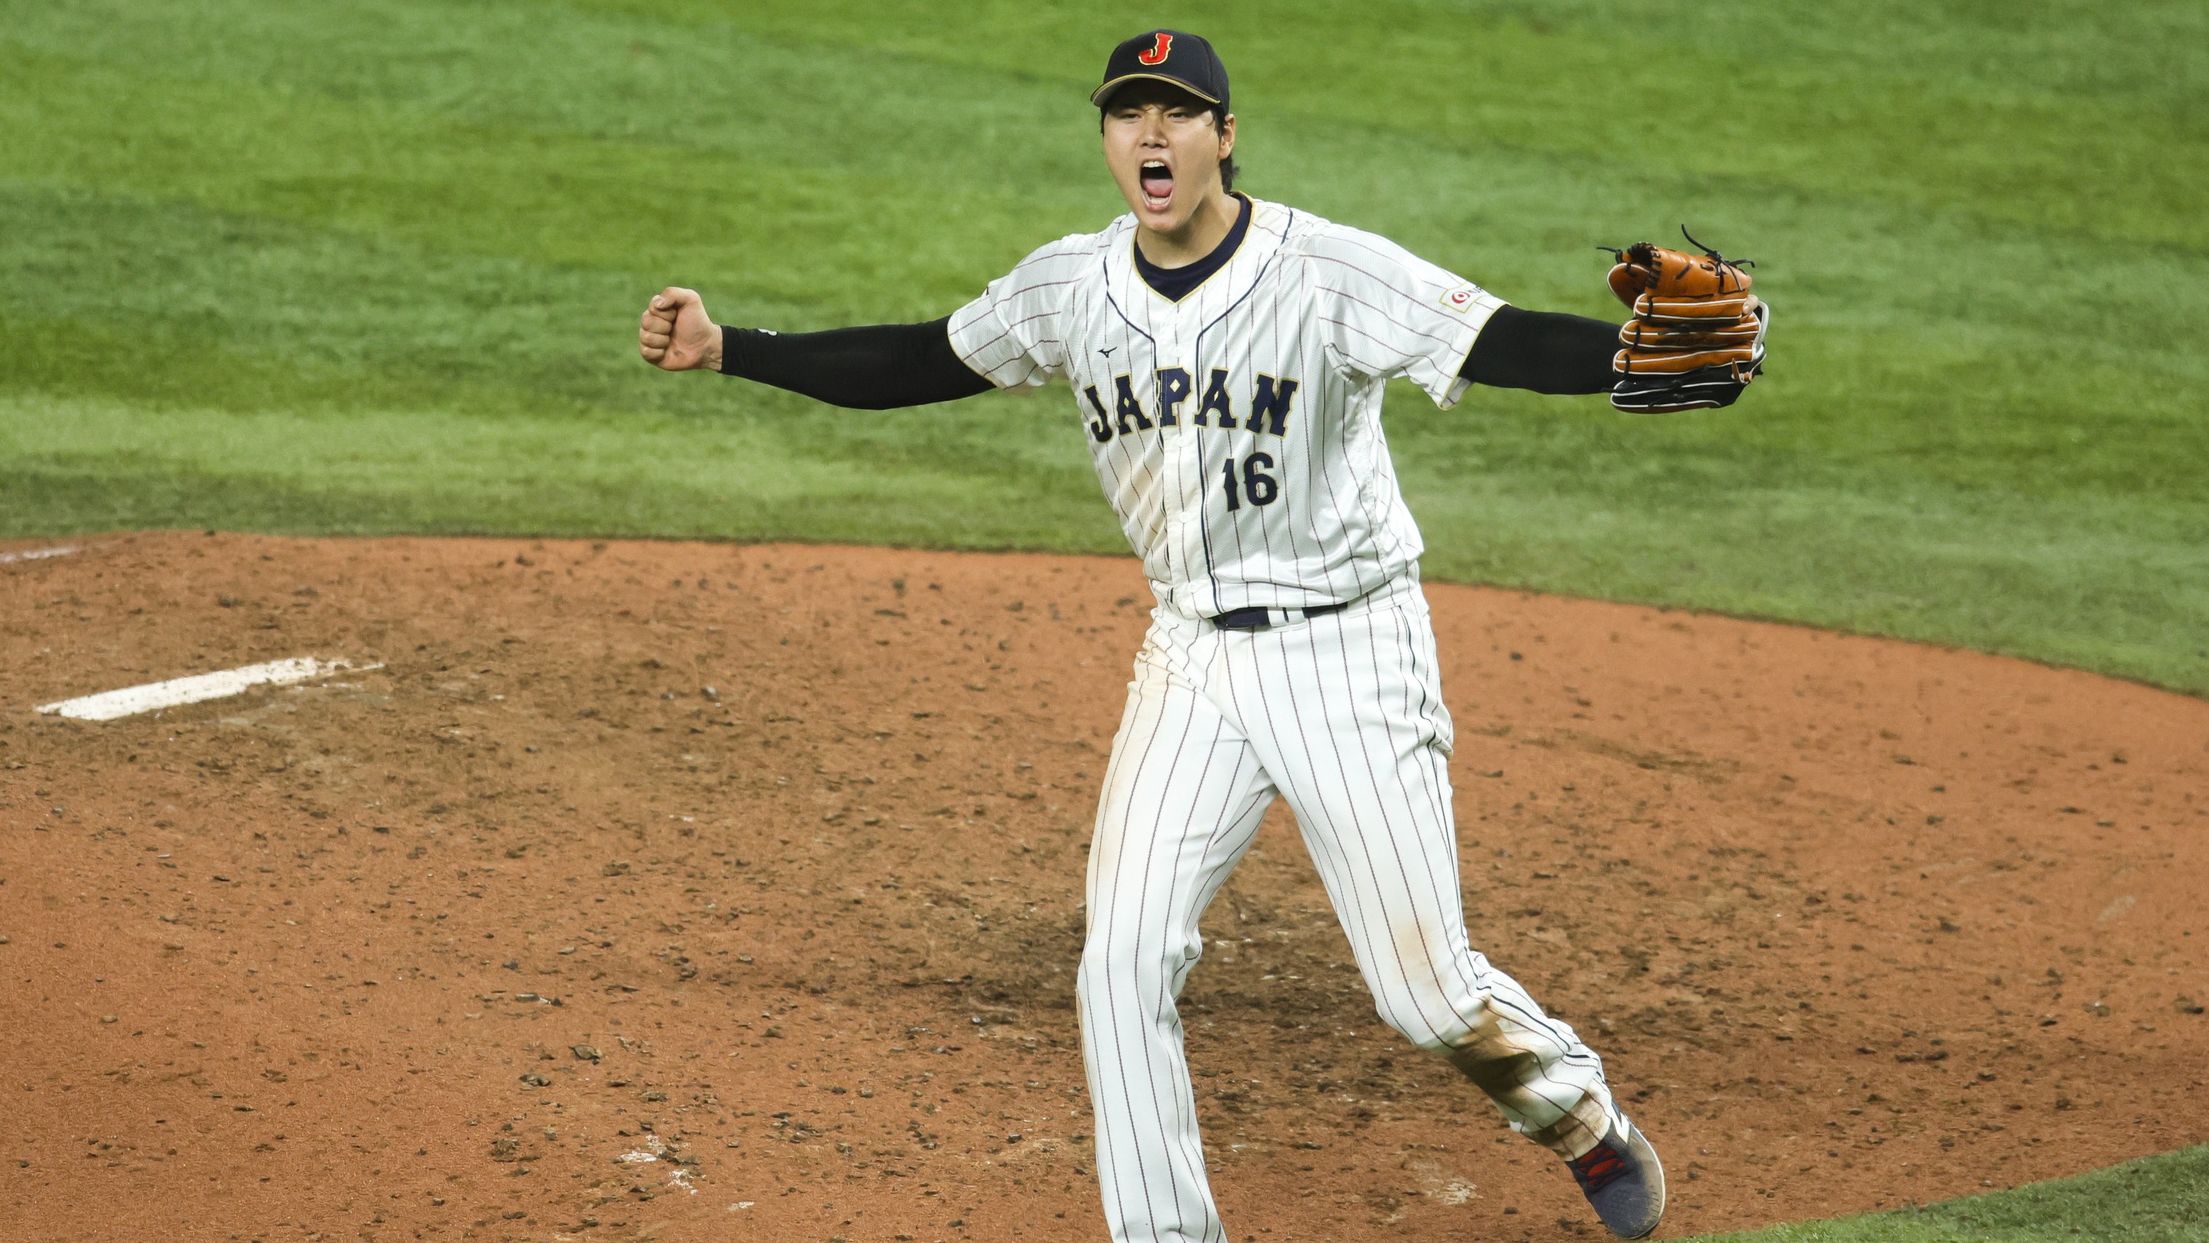 Shohei Ohtani, Mike Trout face off in World Baseball Classic final